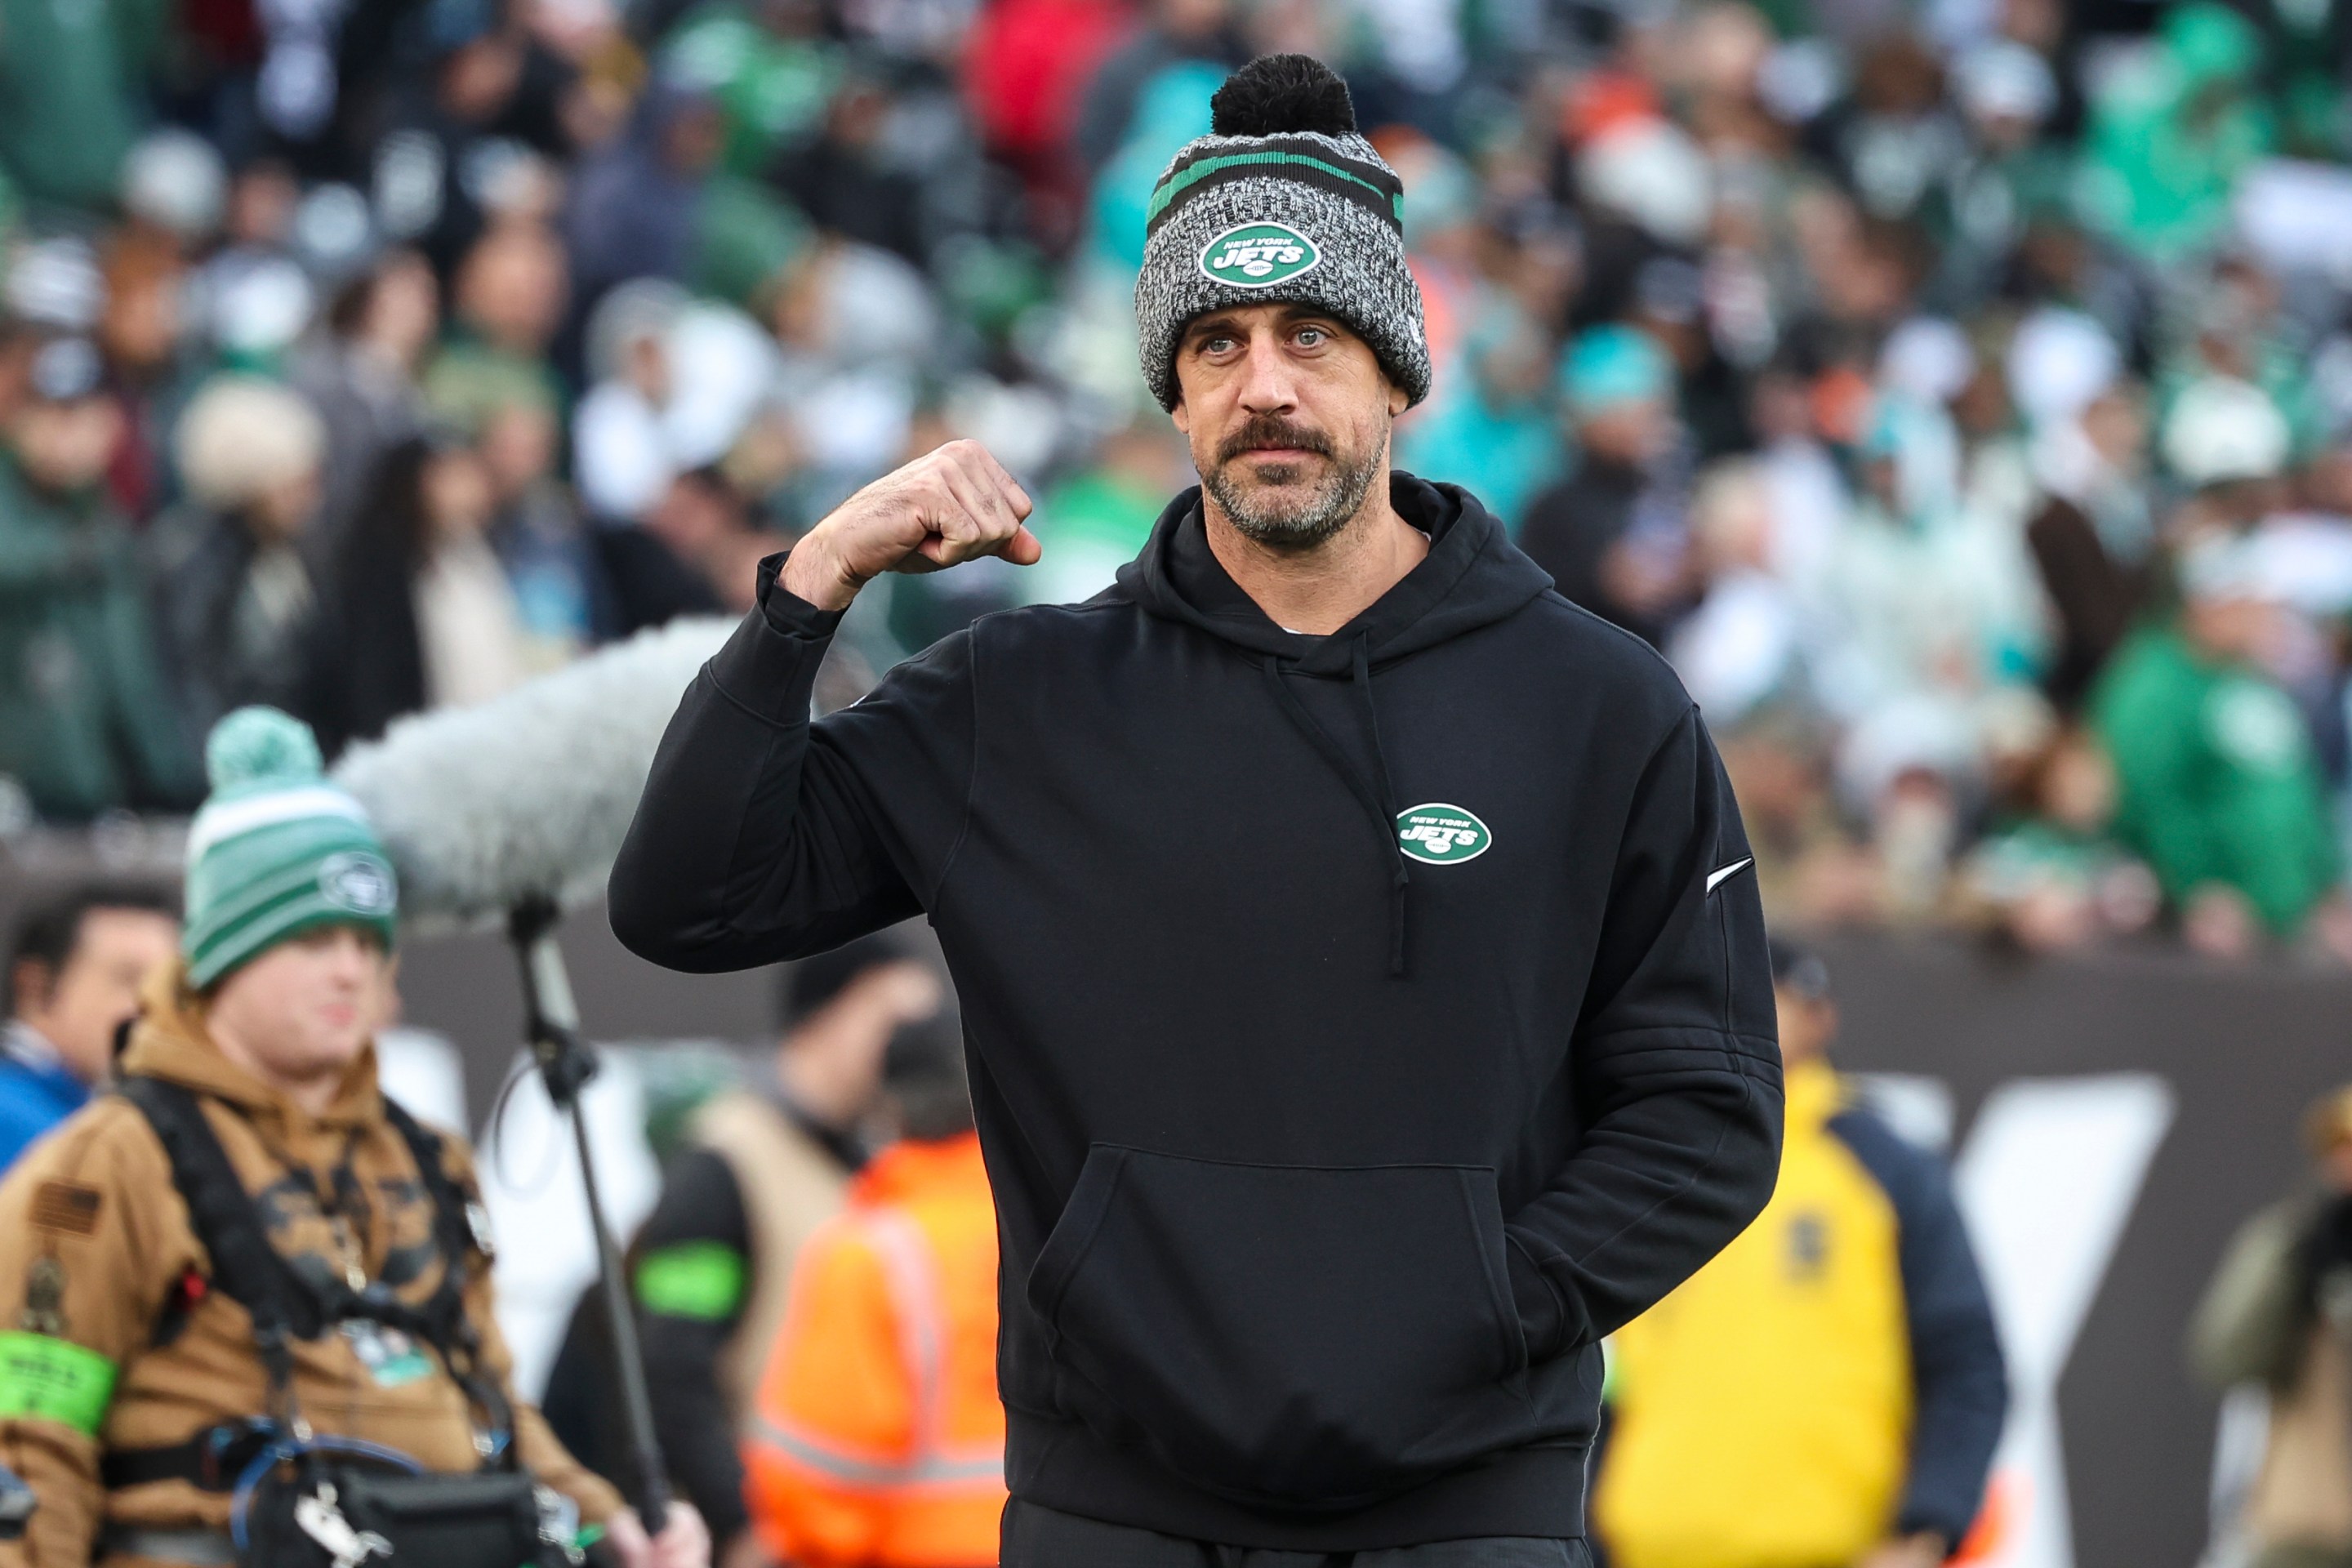 Aaron Rodgers #8 of the New York Jets looks on from the sideline prior to an NFL football game against the Miami Dolphins at MetLife Stadium on November 24, 2023 in East Rutherford, New Jersey.